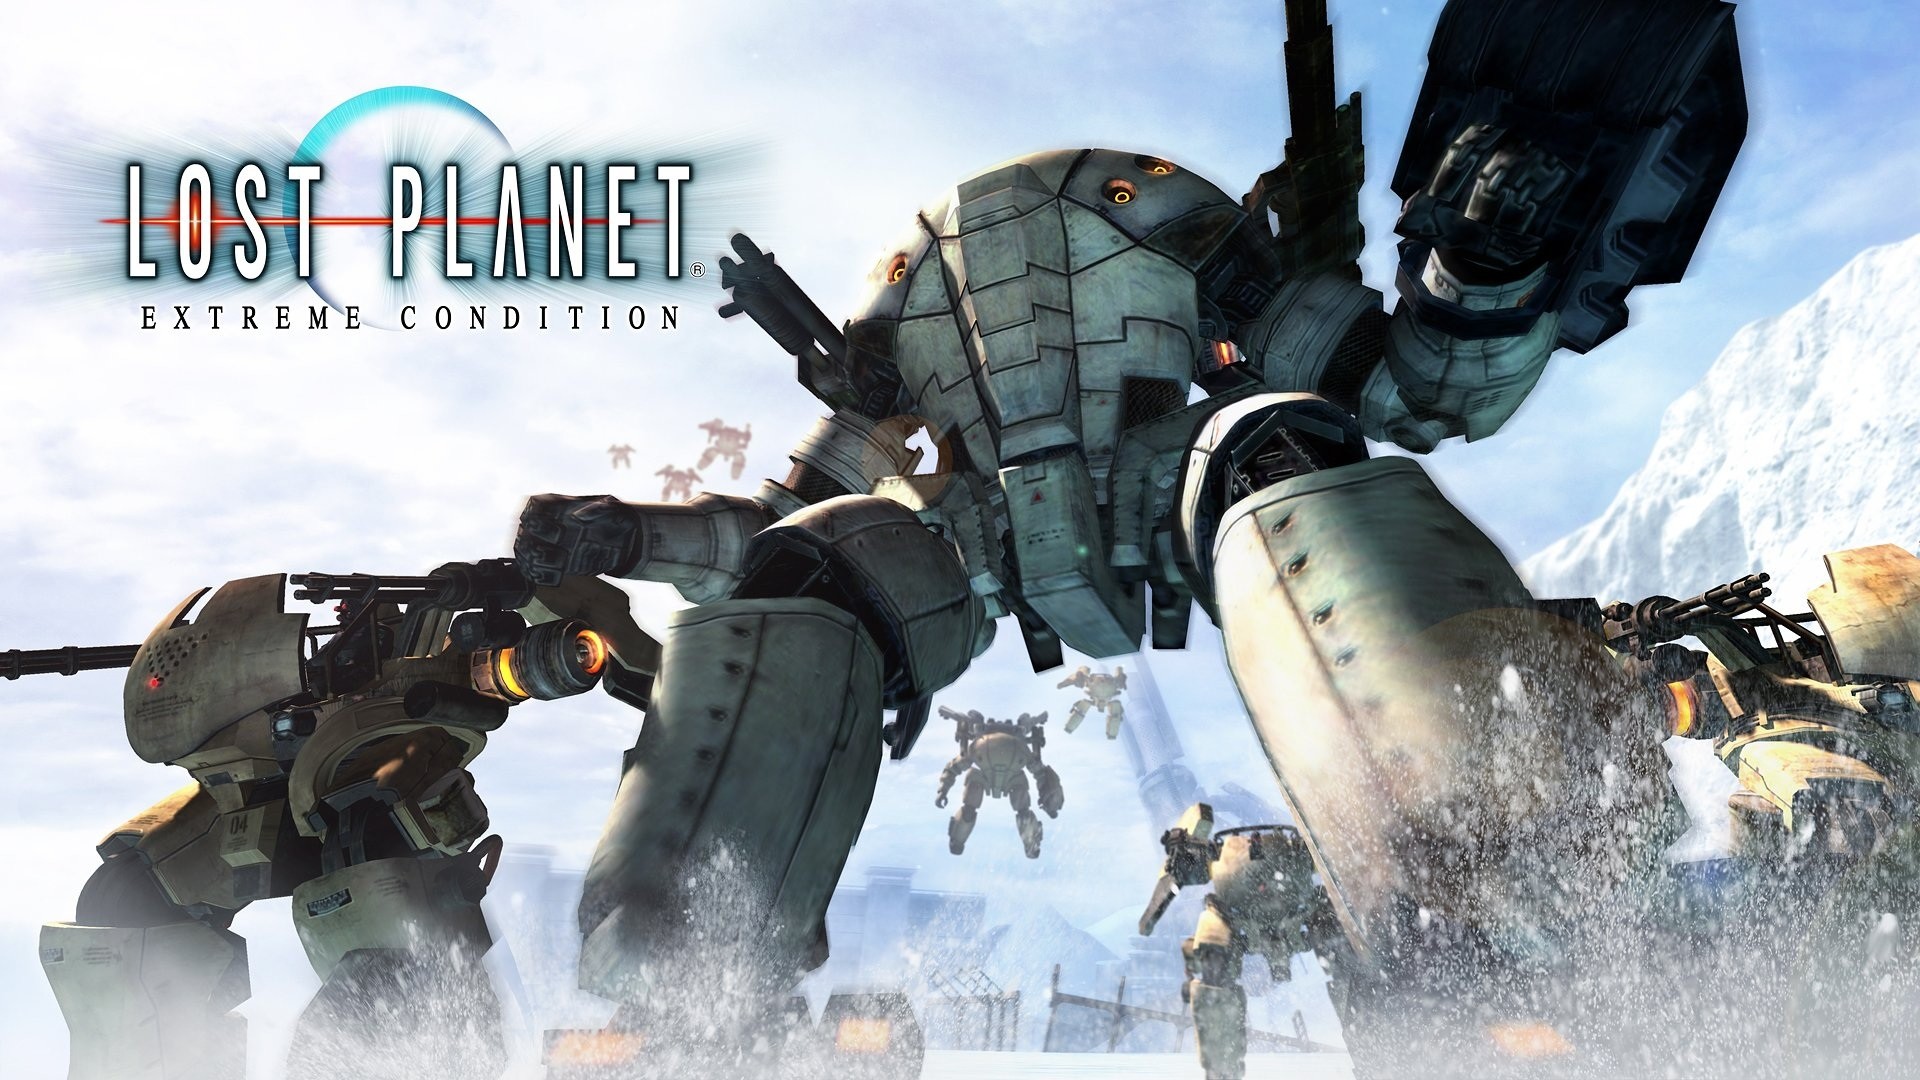 Lost Planet Extreme Condition Wallpaper 44541 1920x1080